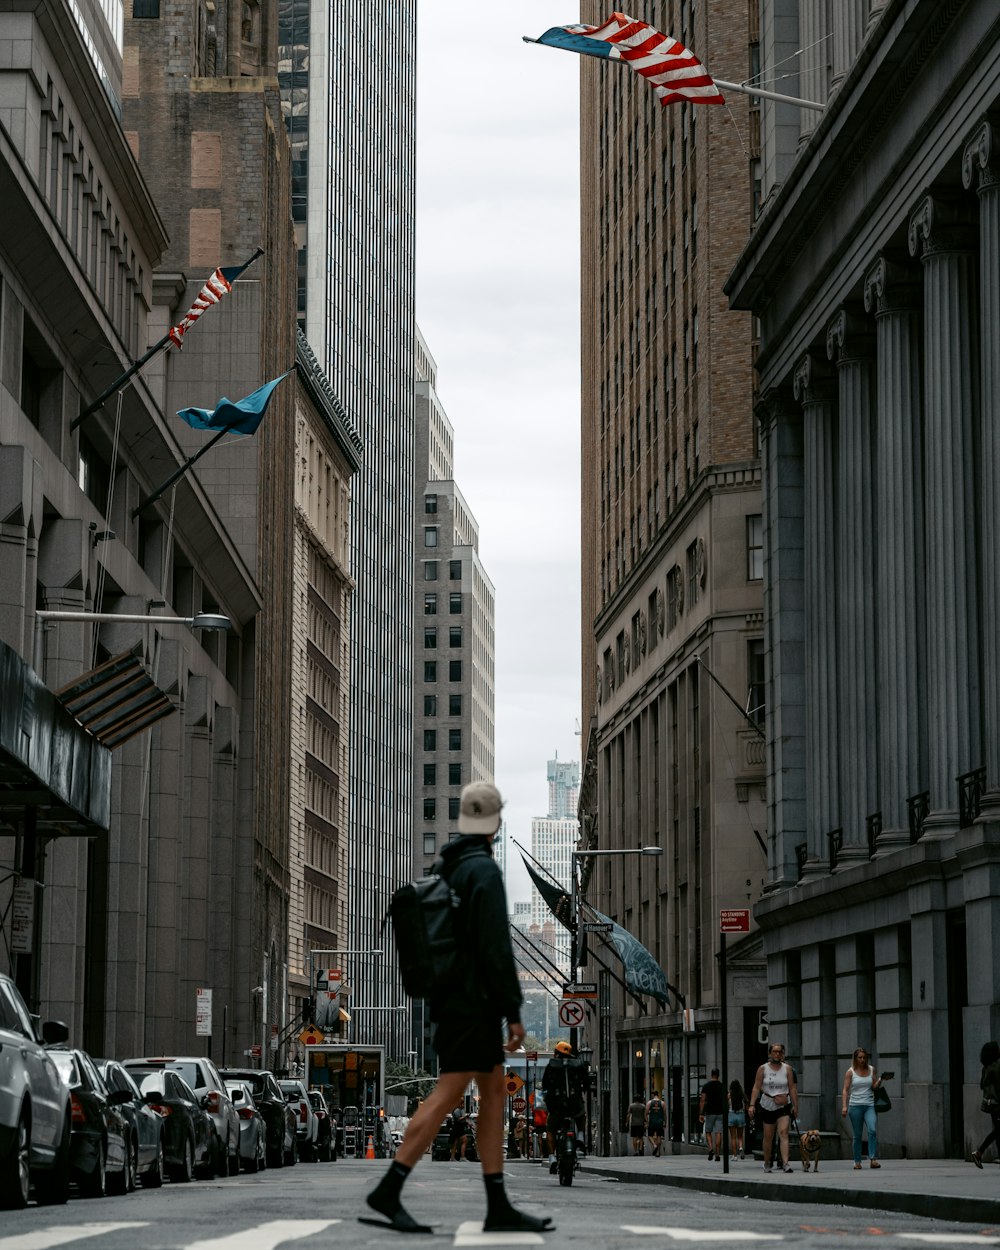 a person walking across a street in a city